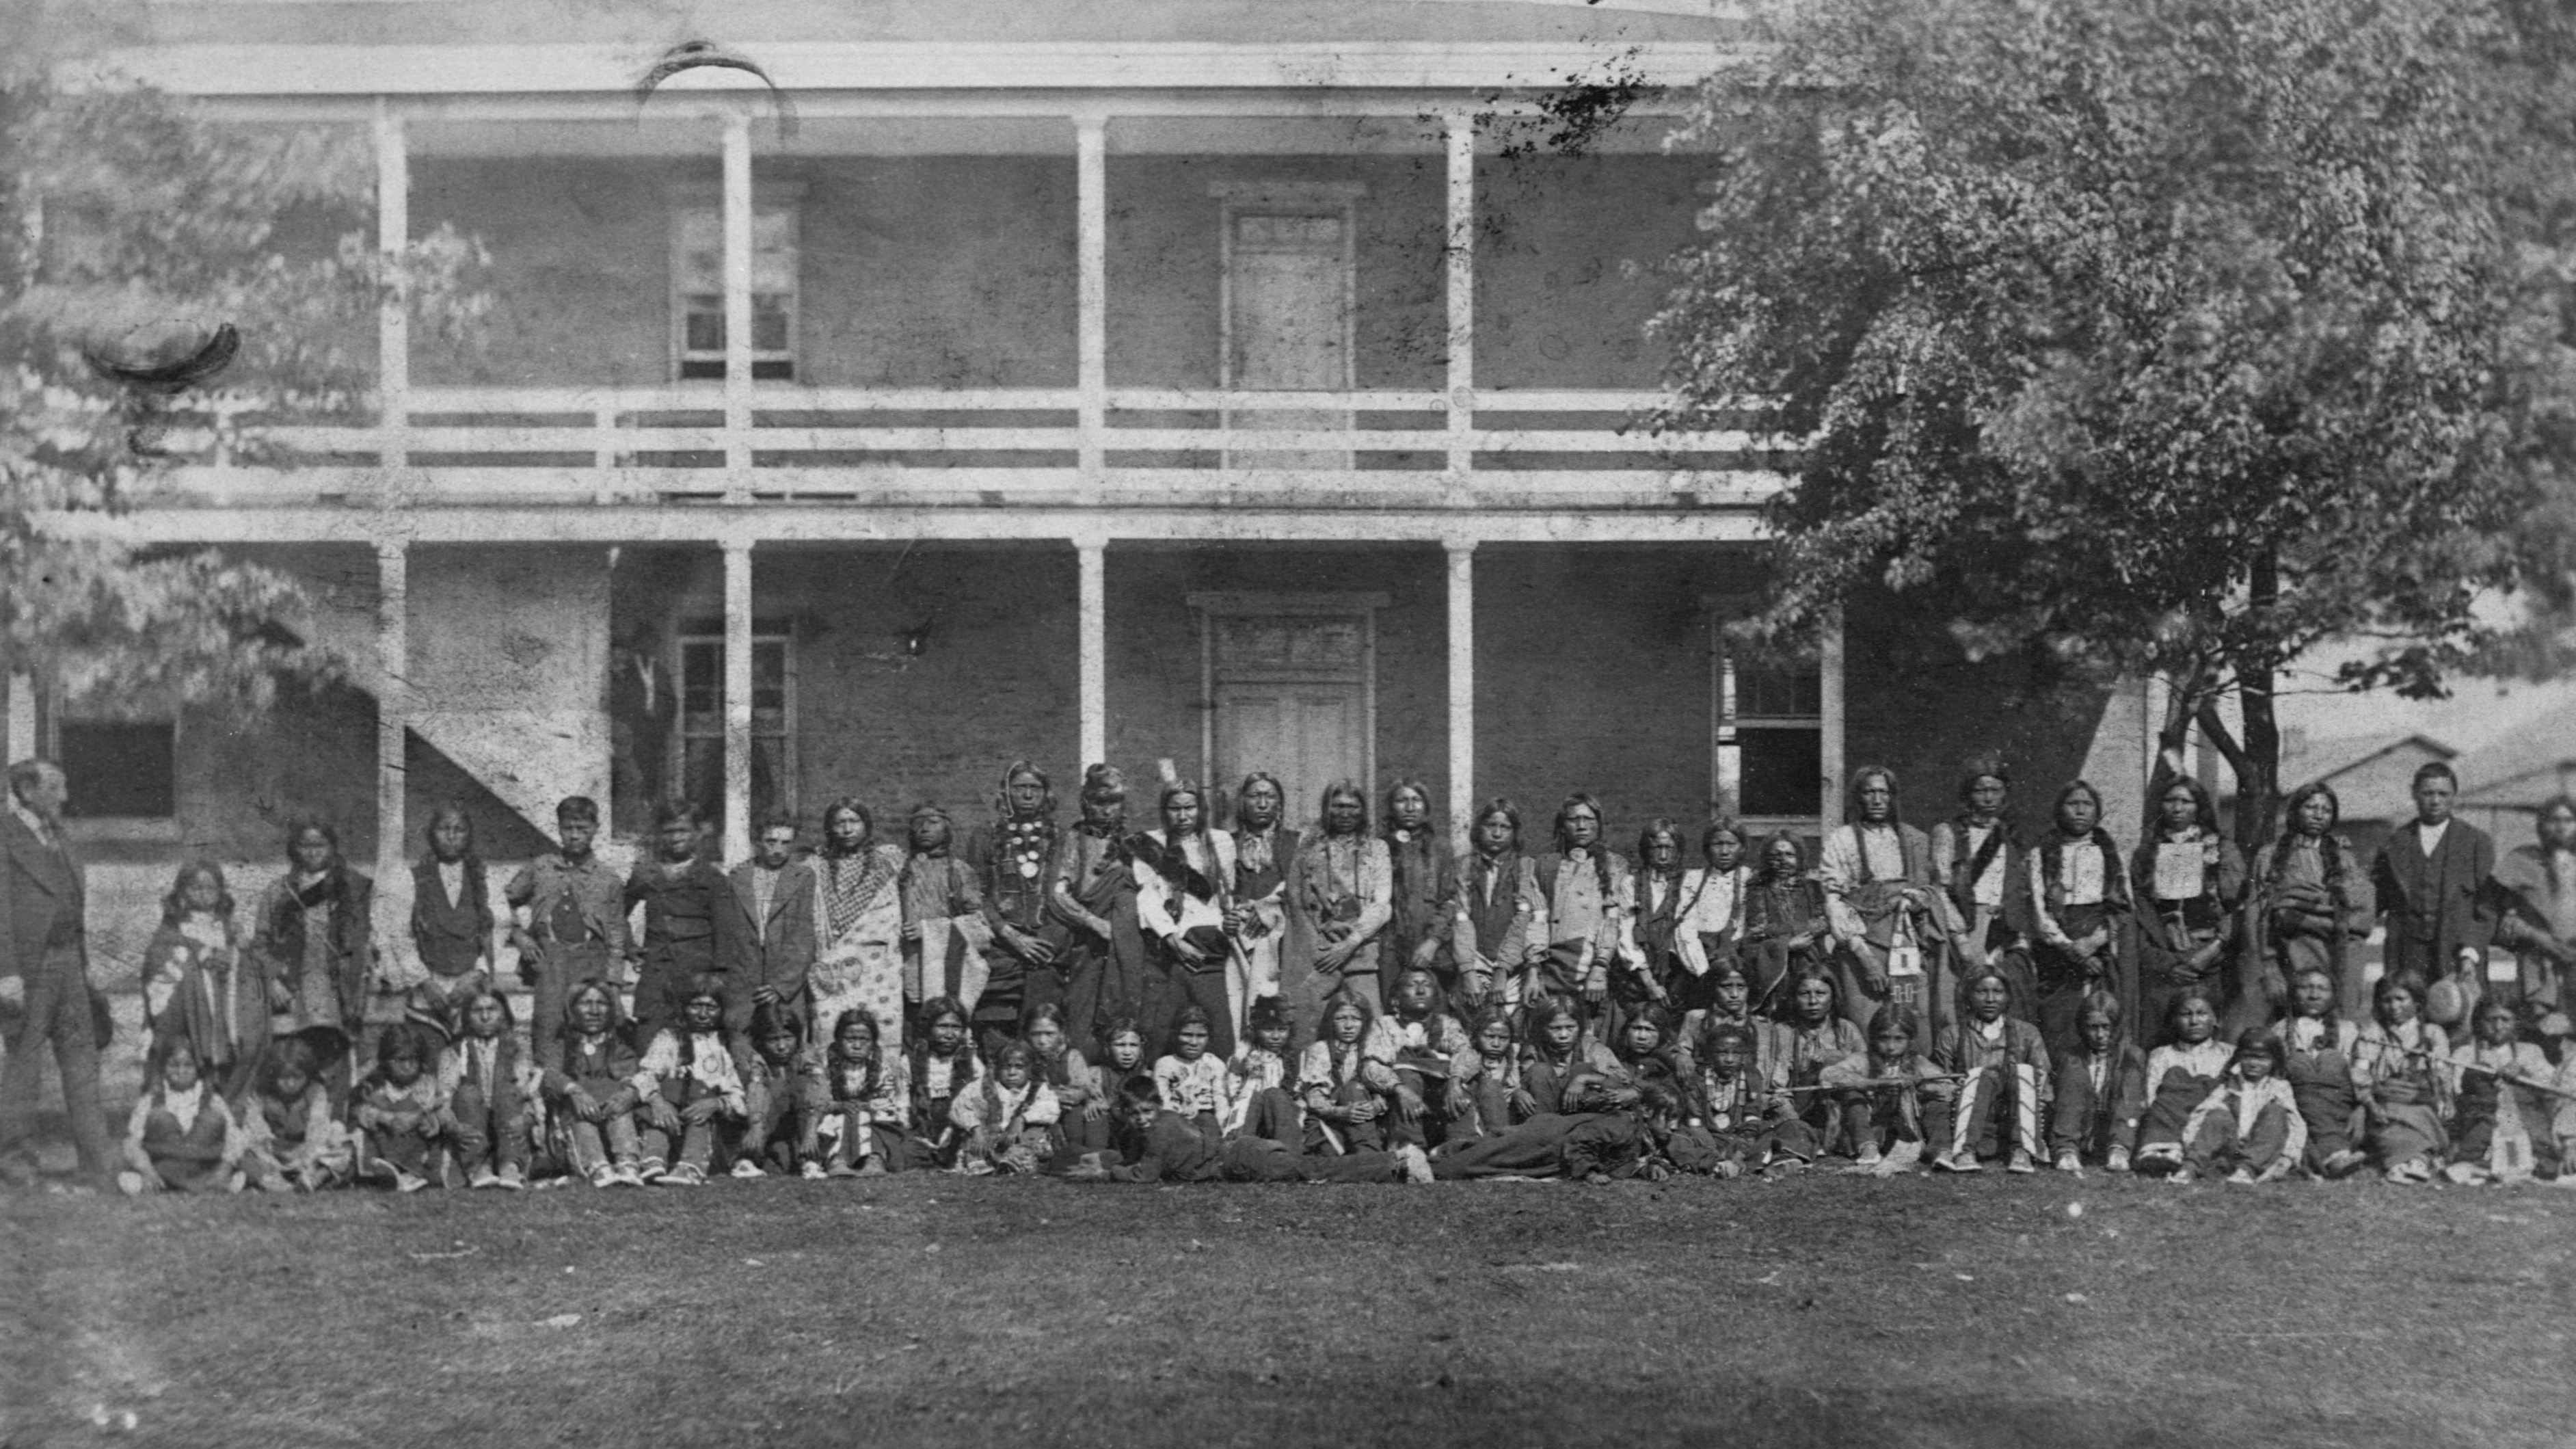 How Boarding Schools Tried To 'Kill The Indian' Through Assimilation - History